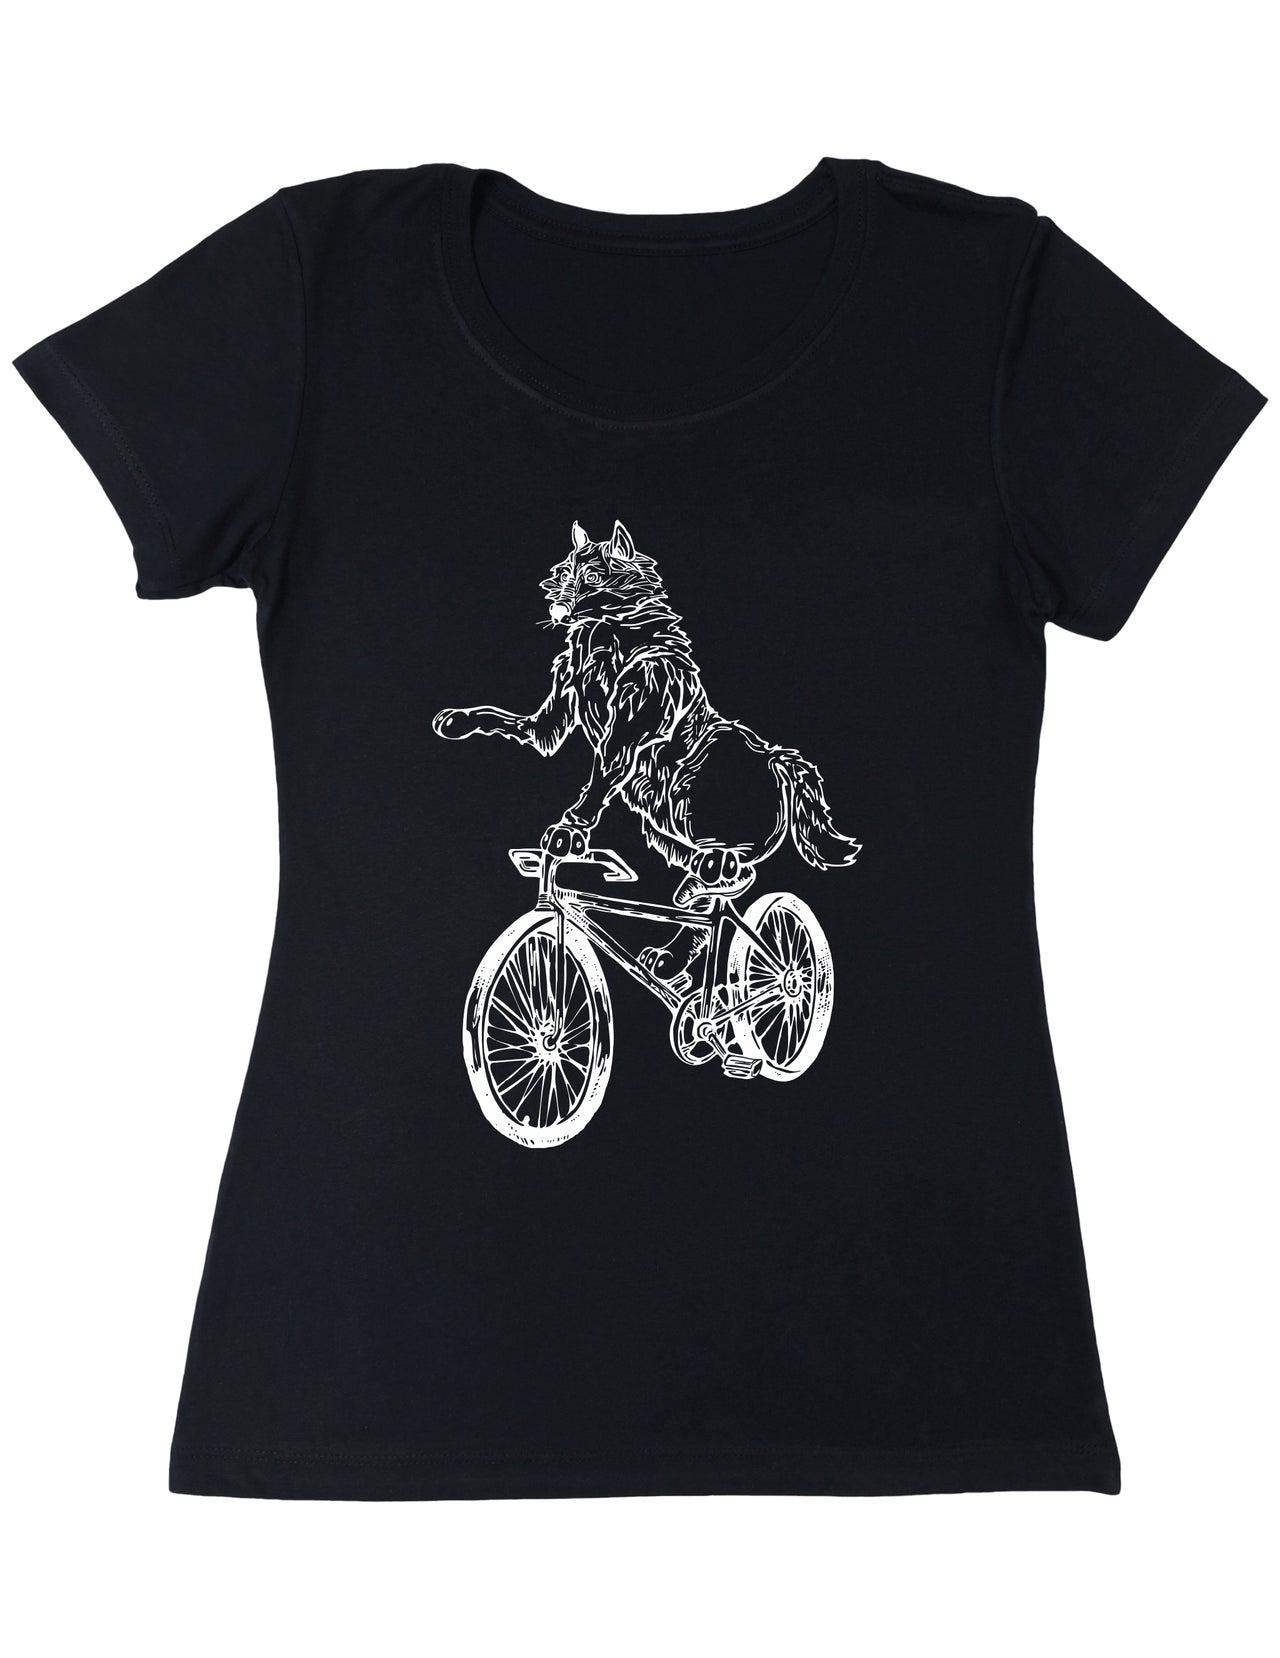 SEEMBO Wolf Cycling Bicycle Women's Poly-Cotton T-Shirt